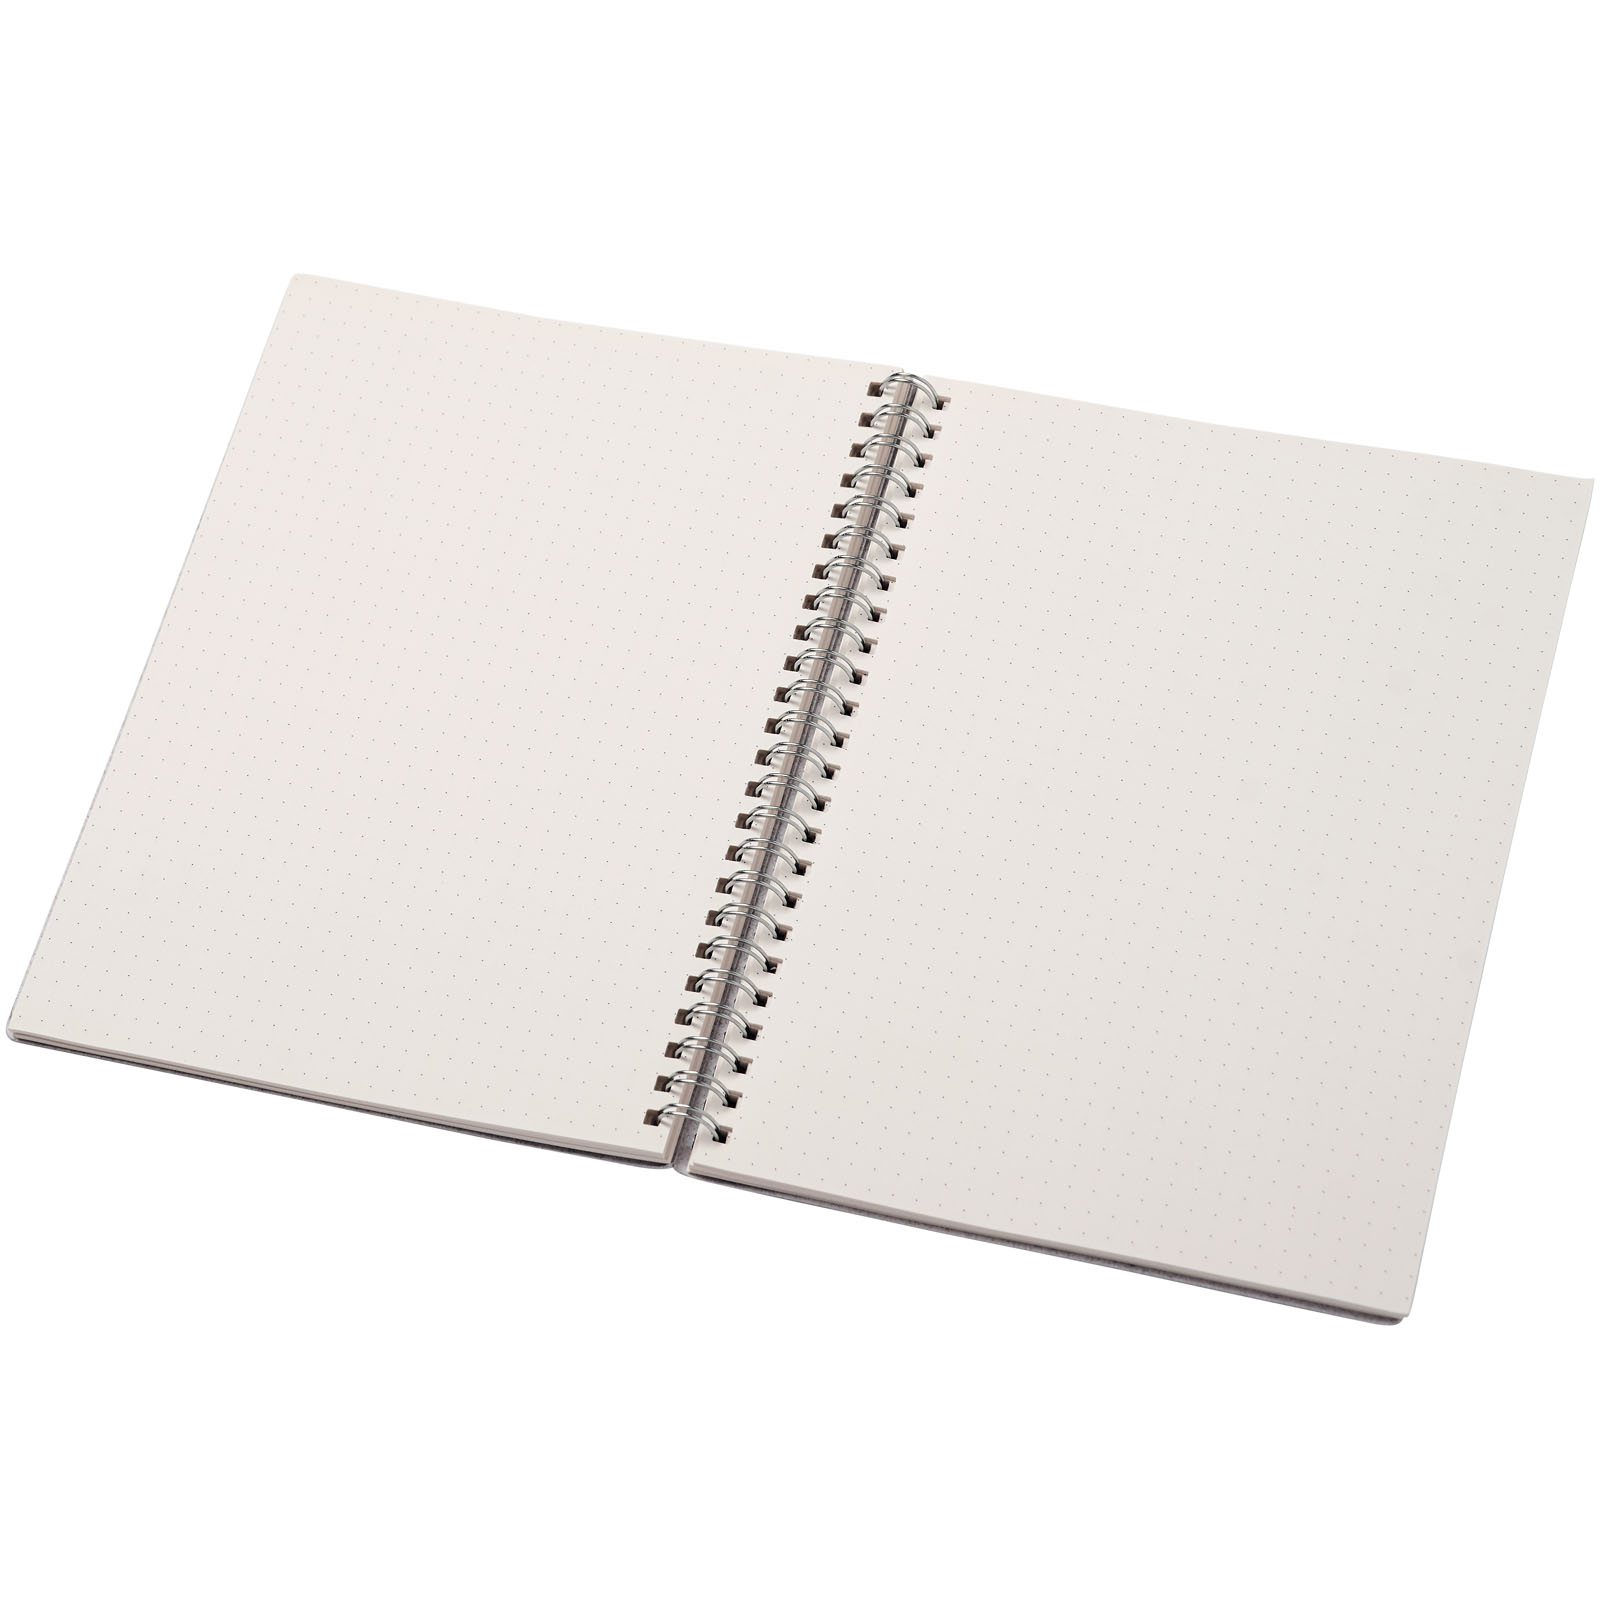 Advertising Notebooks - Bianco A5 size wire-o notebook - 3